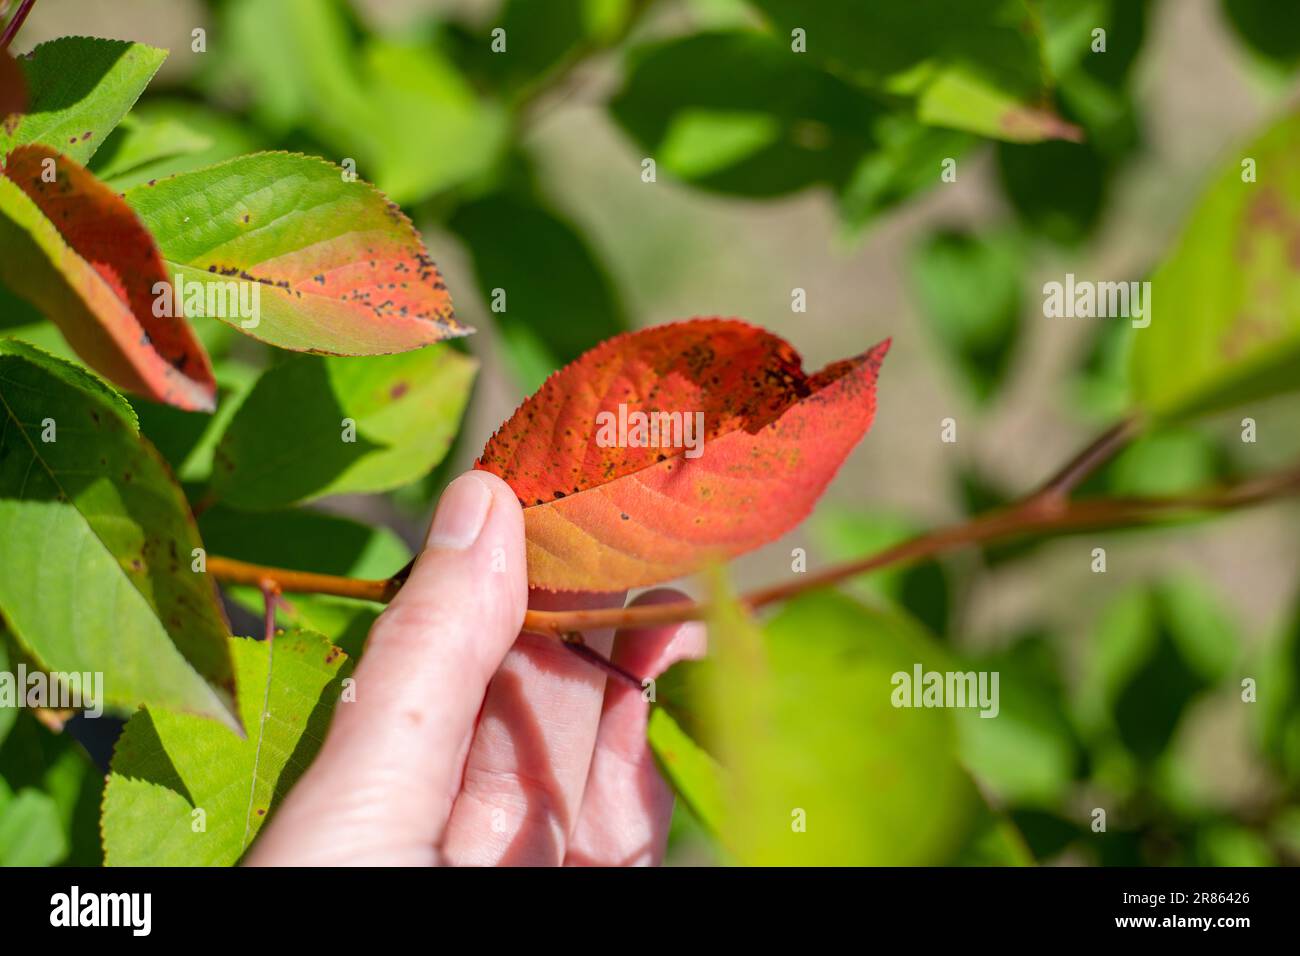 Leaf of a fruit tree affected by coccomycosis in the hands of a gardener. Fight against diseases in the garden. Stock Photo